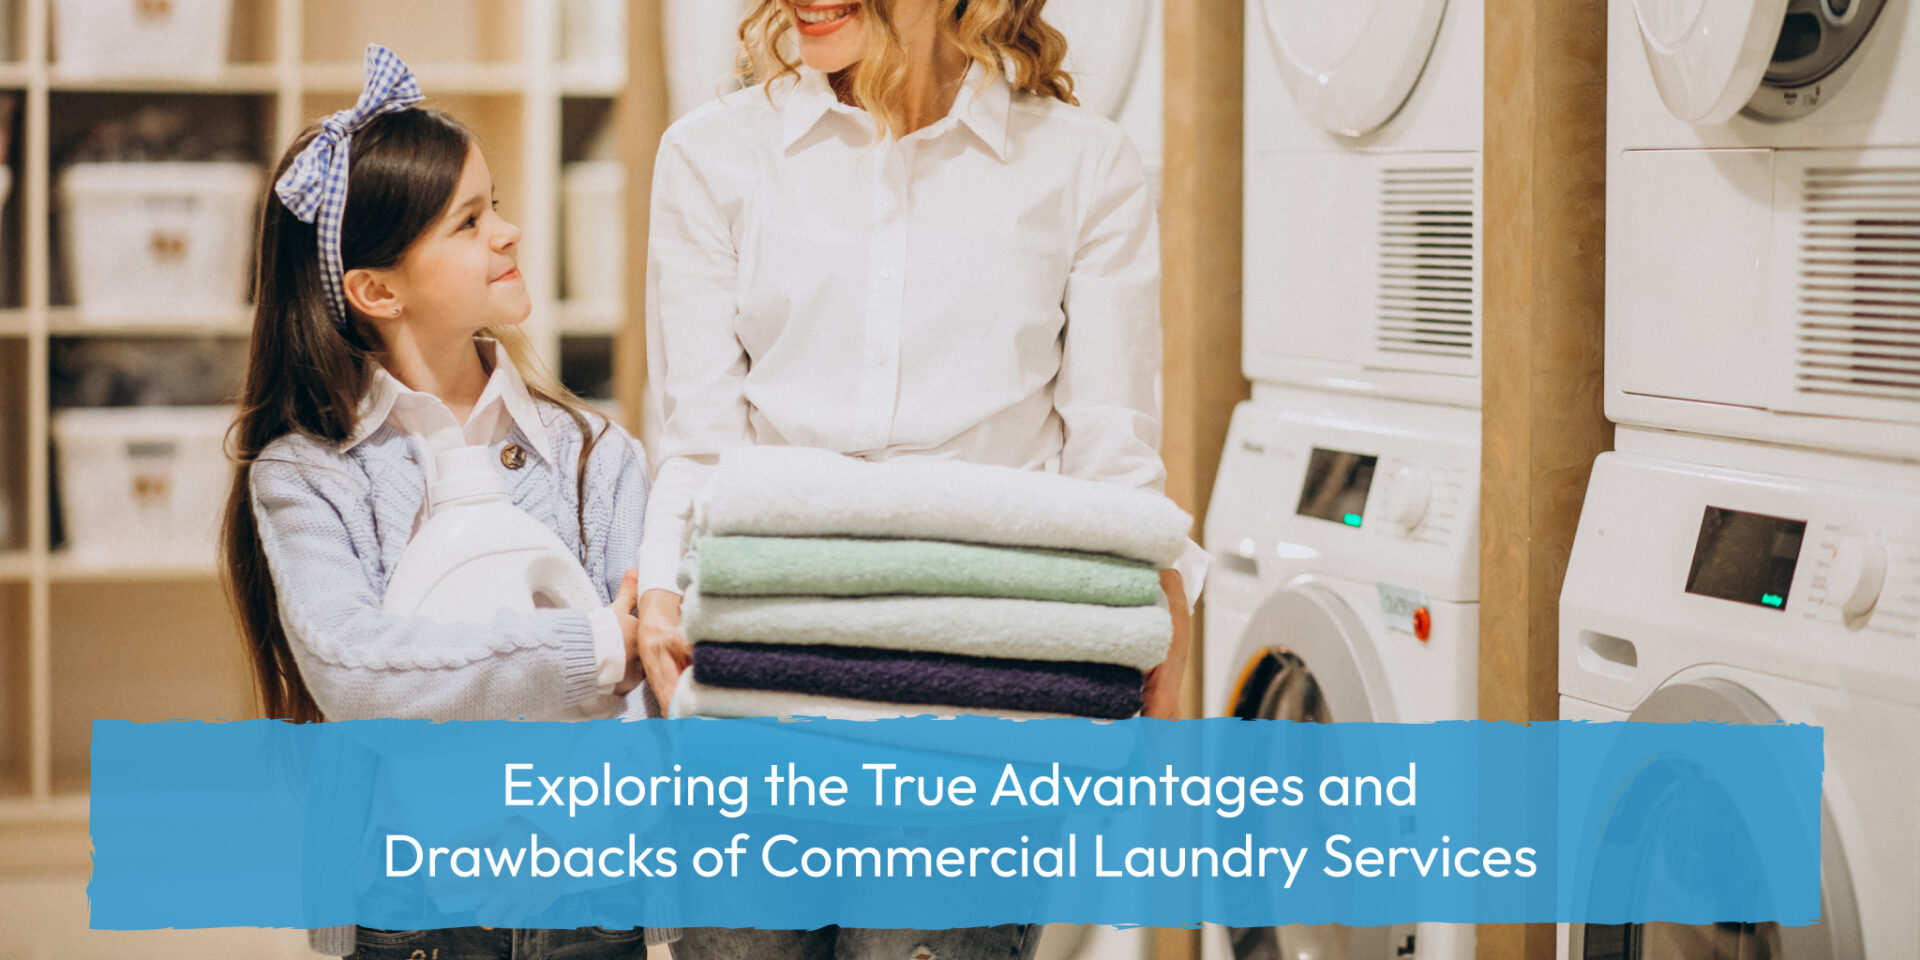 Advantages and Drawbacks of Commercial Laundry Services